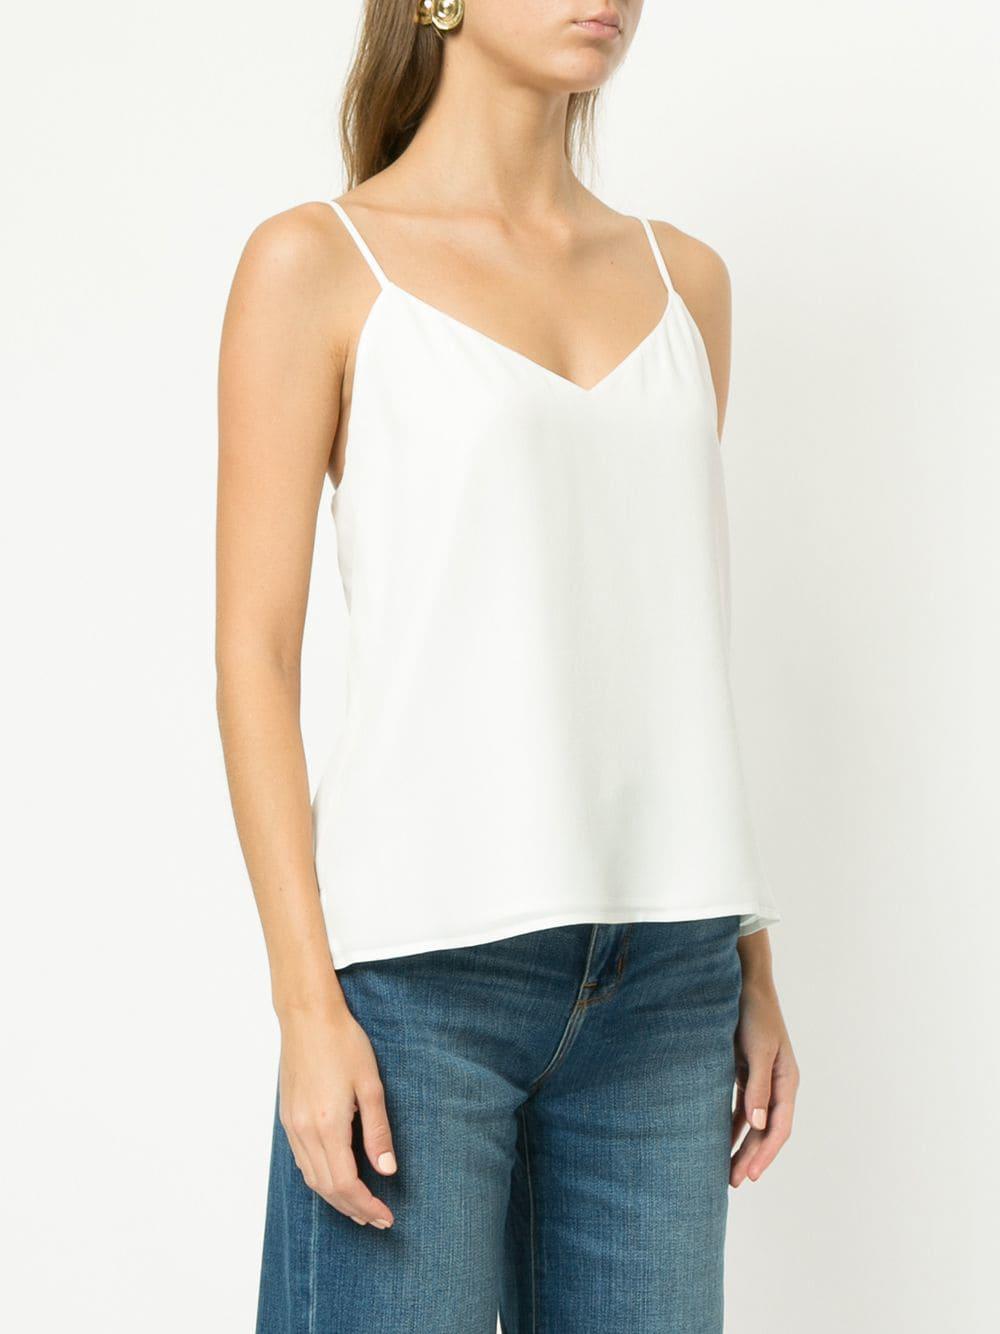 L'Agence Silk V-neck Camisole in White - Lyst